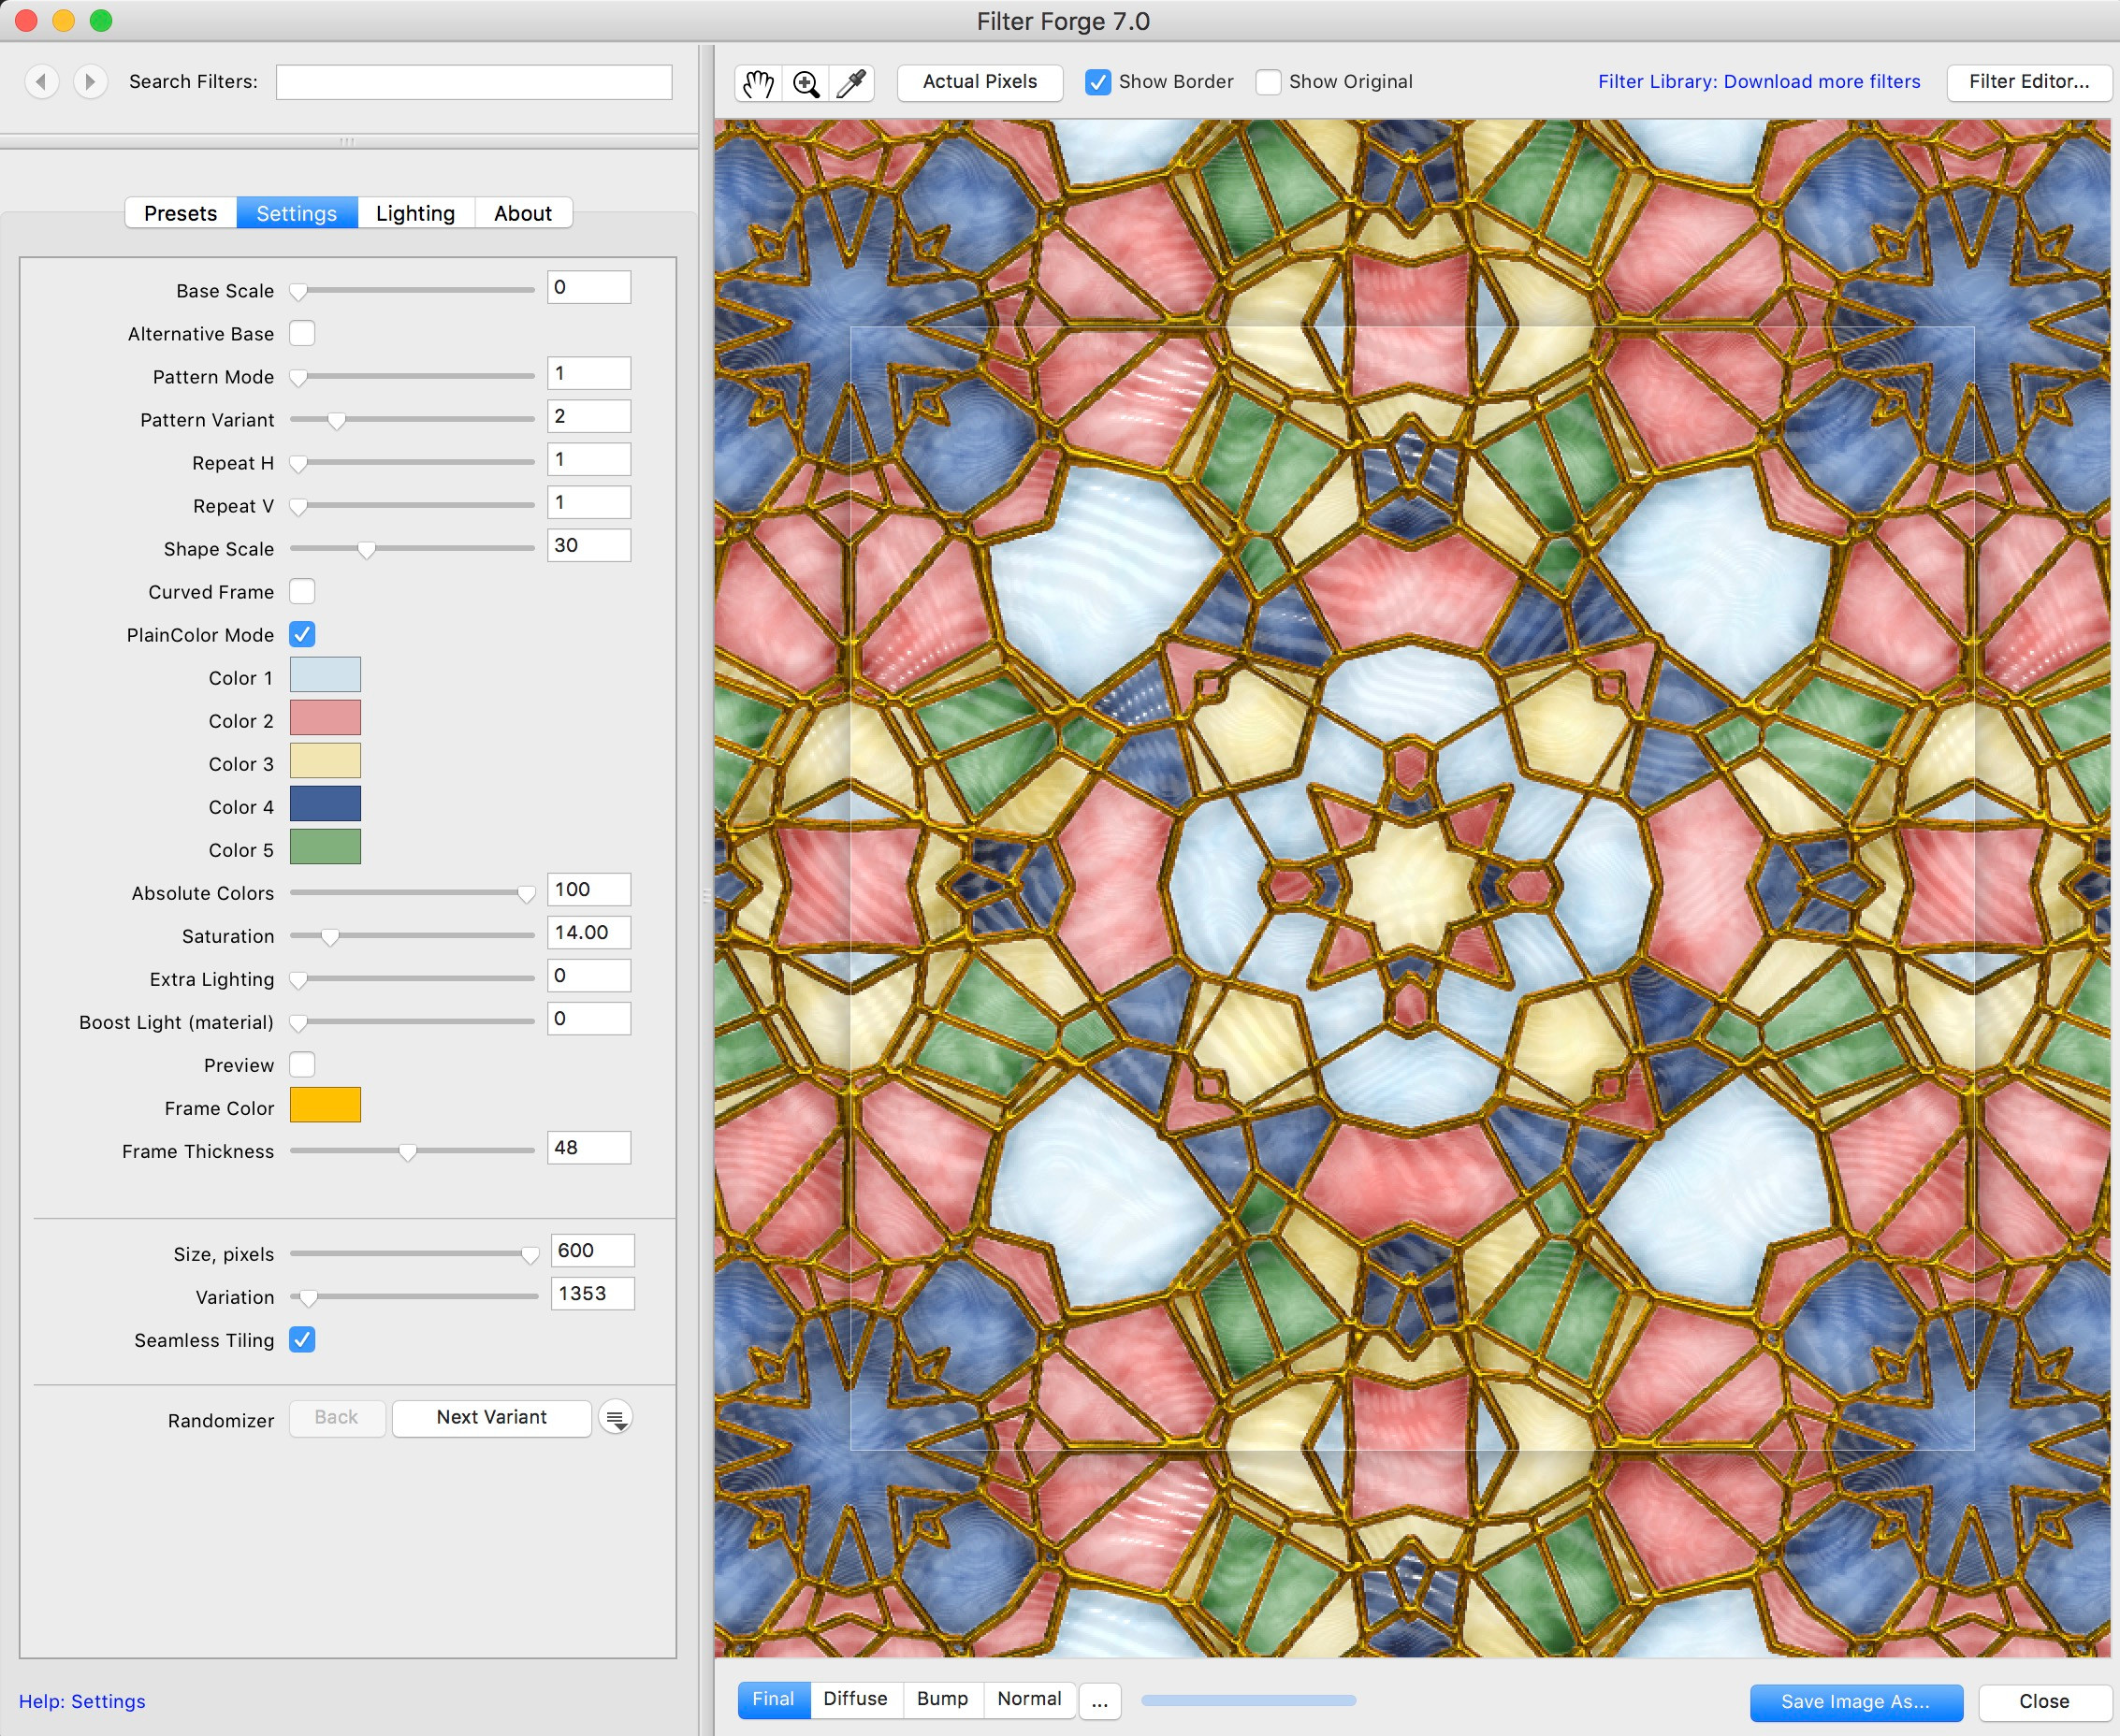 I made a simple stained glass generator a few years ago in FilterForge. So I decided to use that for this project.